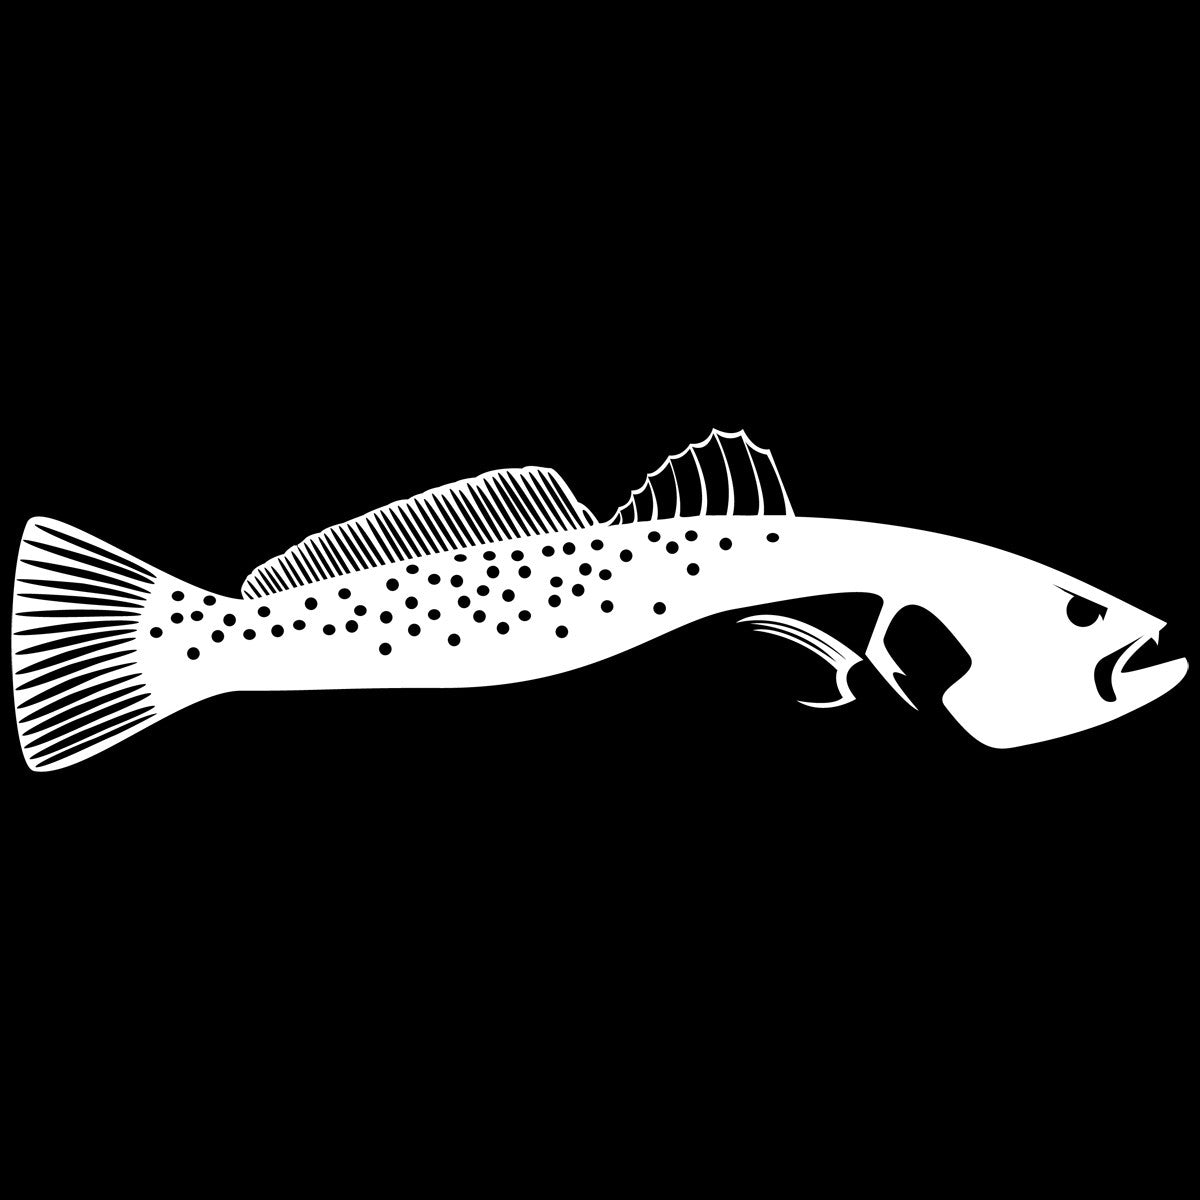 Cheap For Fishing Fish Sticker on The Car Vinyl Decal Waterproof Decoration  Car Stickers